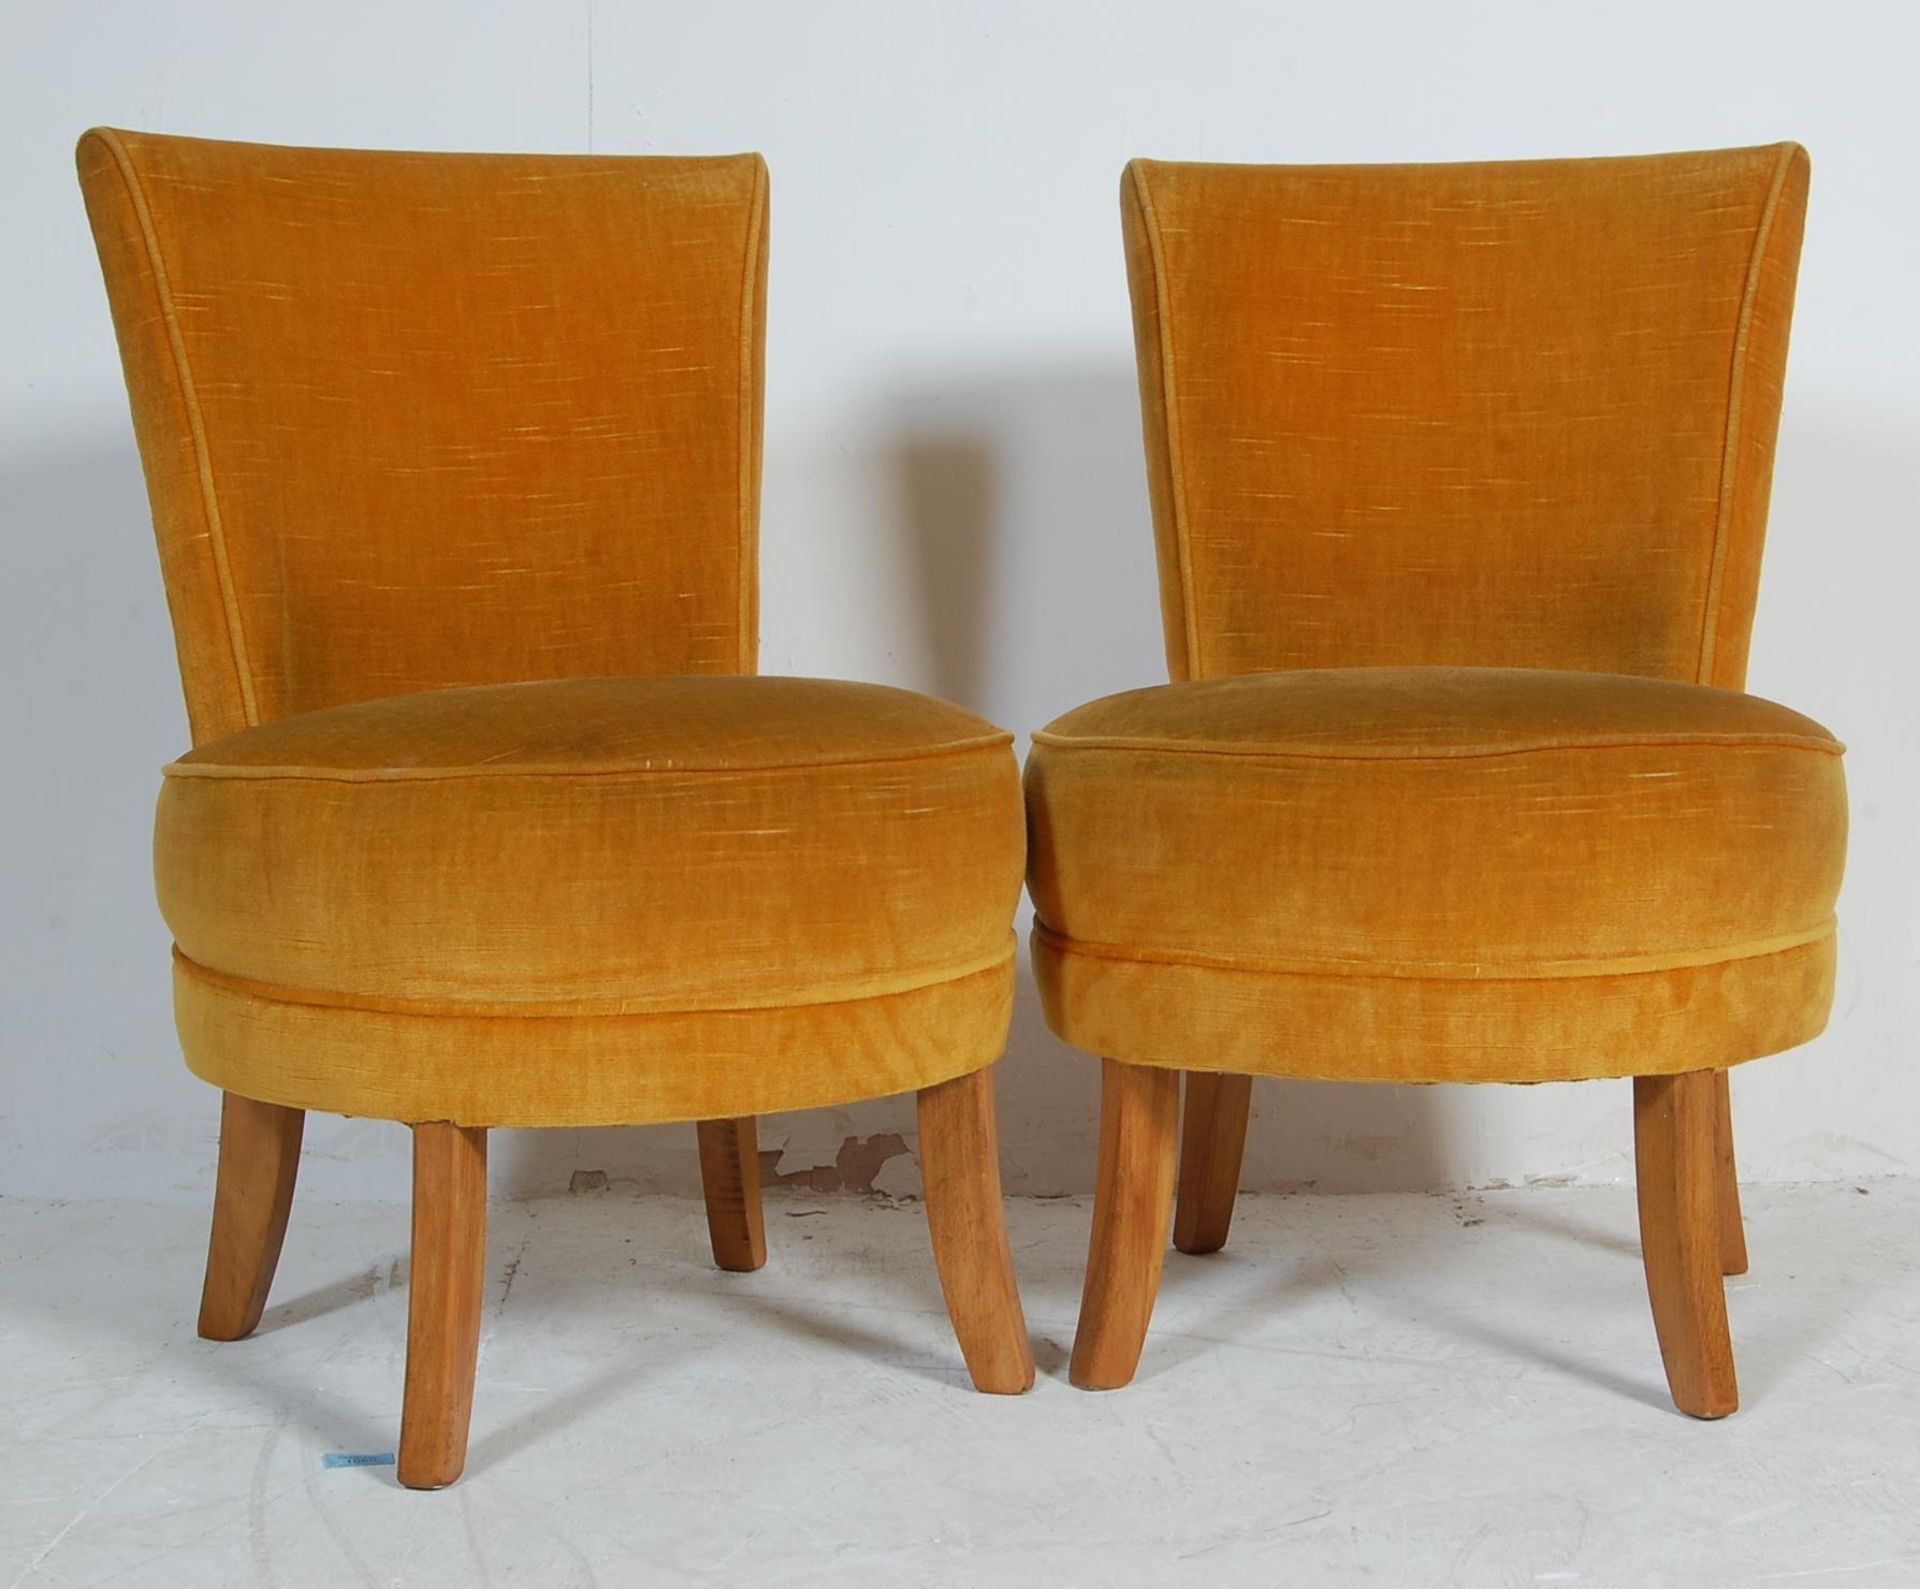 TWO 1950’S VINTAGE RETRO BEDROOM CHAIRS UPHOLSTERED IN YELLOW VELVET